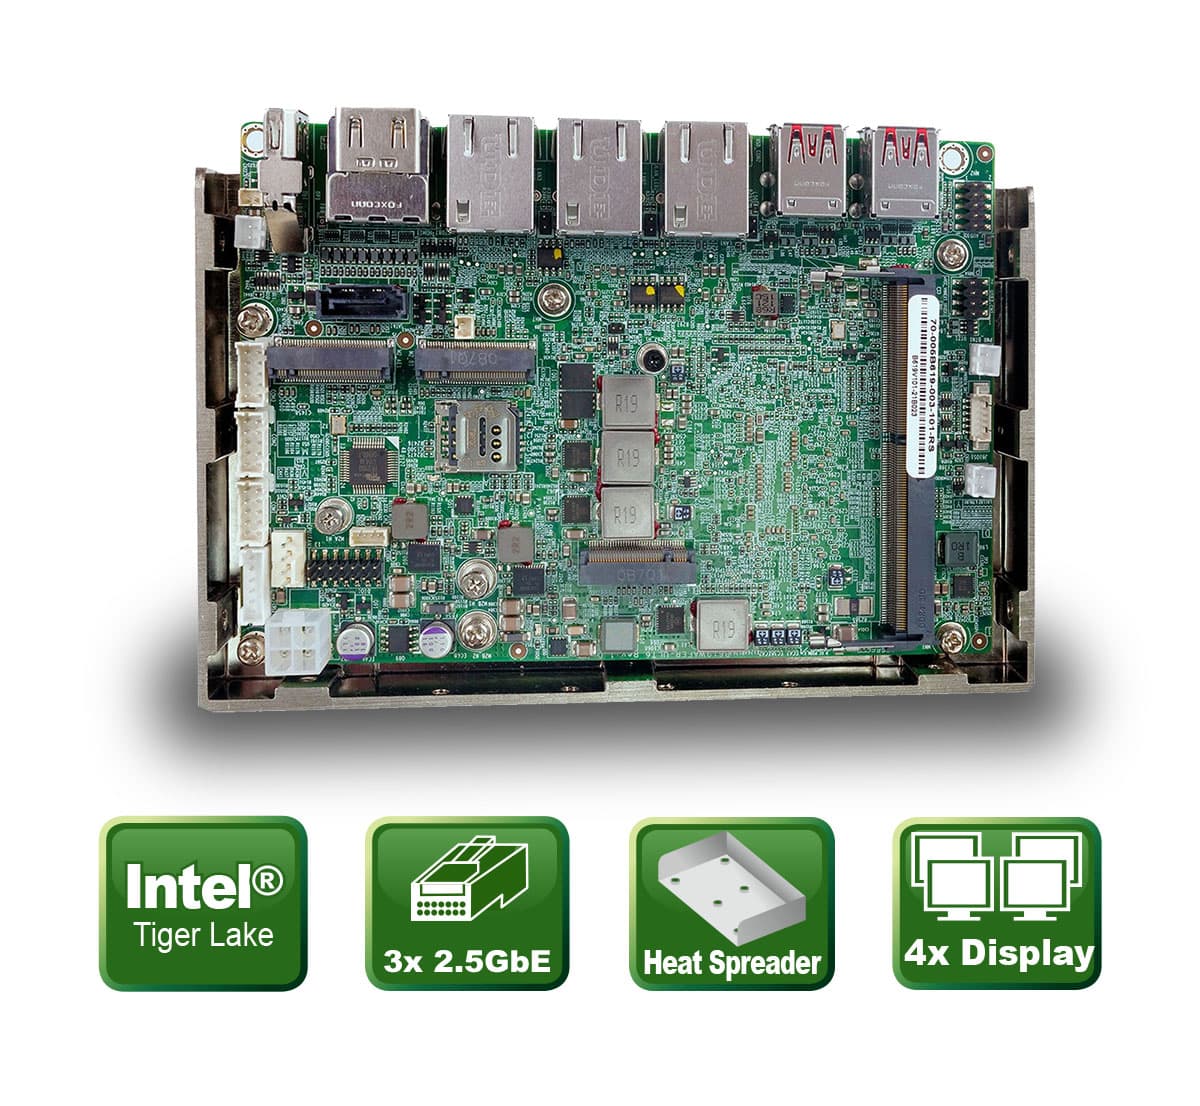 3,5” WAFER-TGL Embedded Board with Tiger Lake Processor